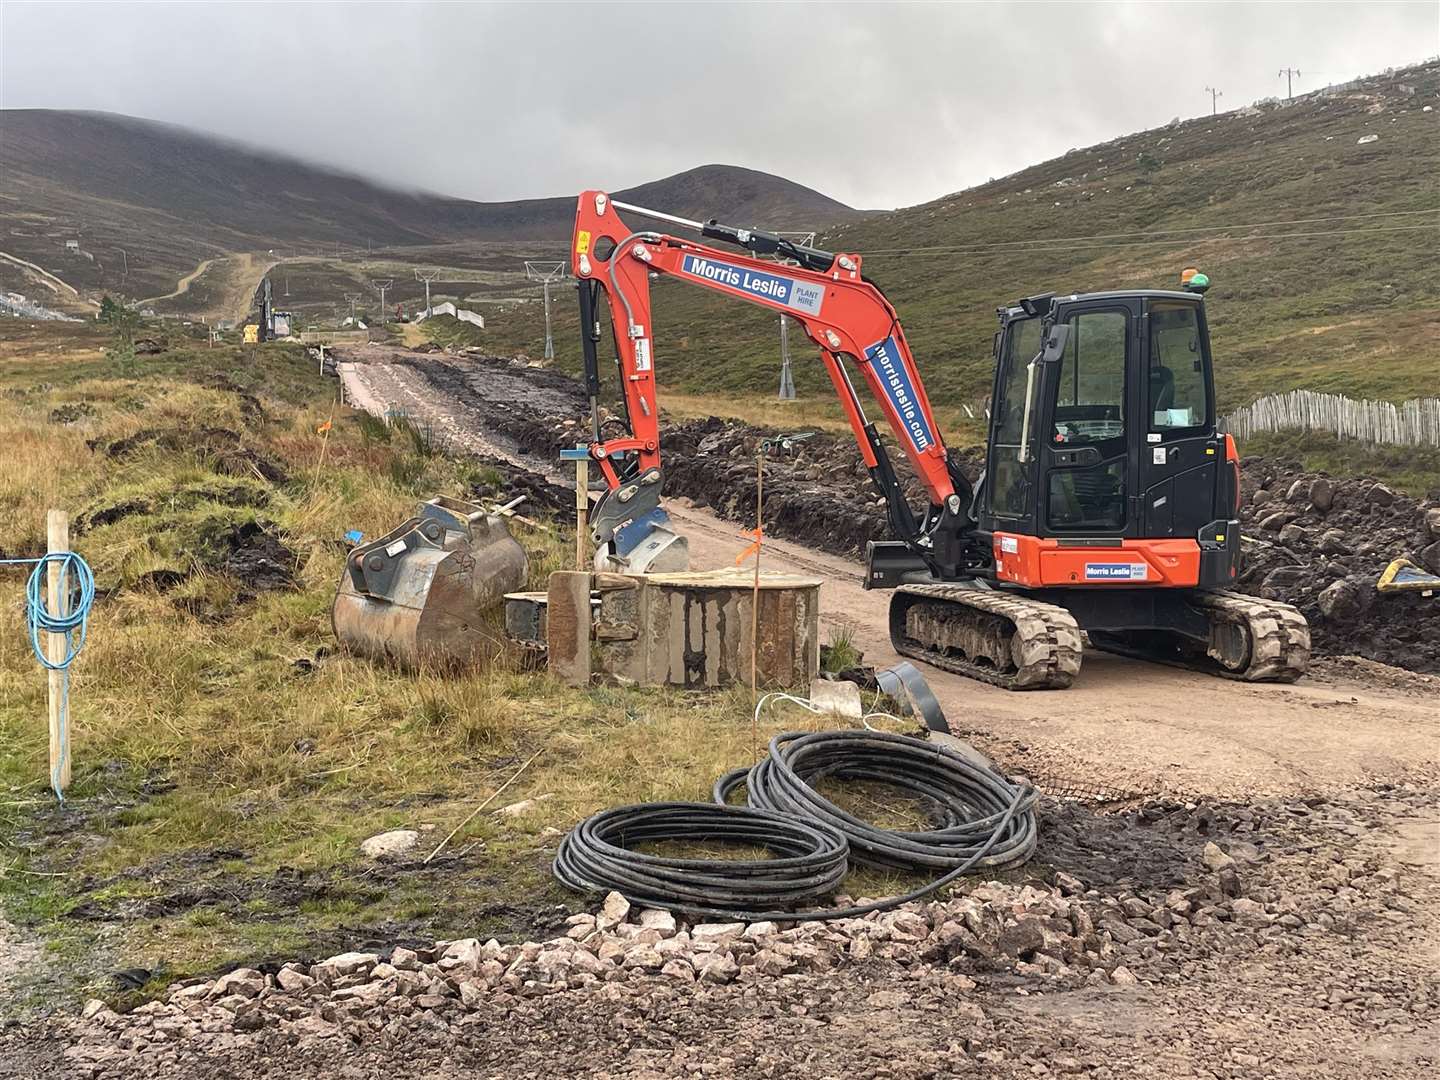 Work is under way to instal two magic carpets at Cairngorm Mountain to serve snowsports and mountain biking.